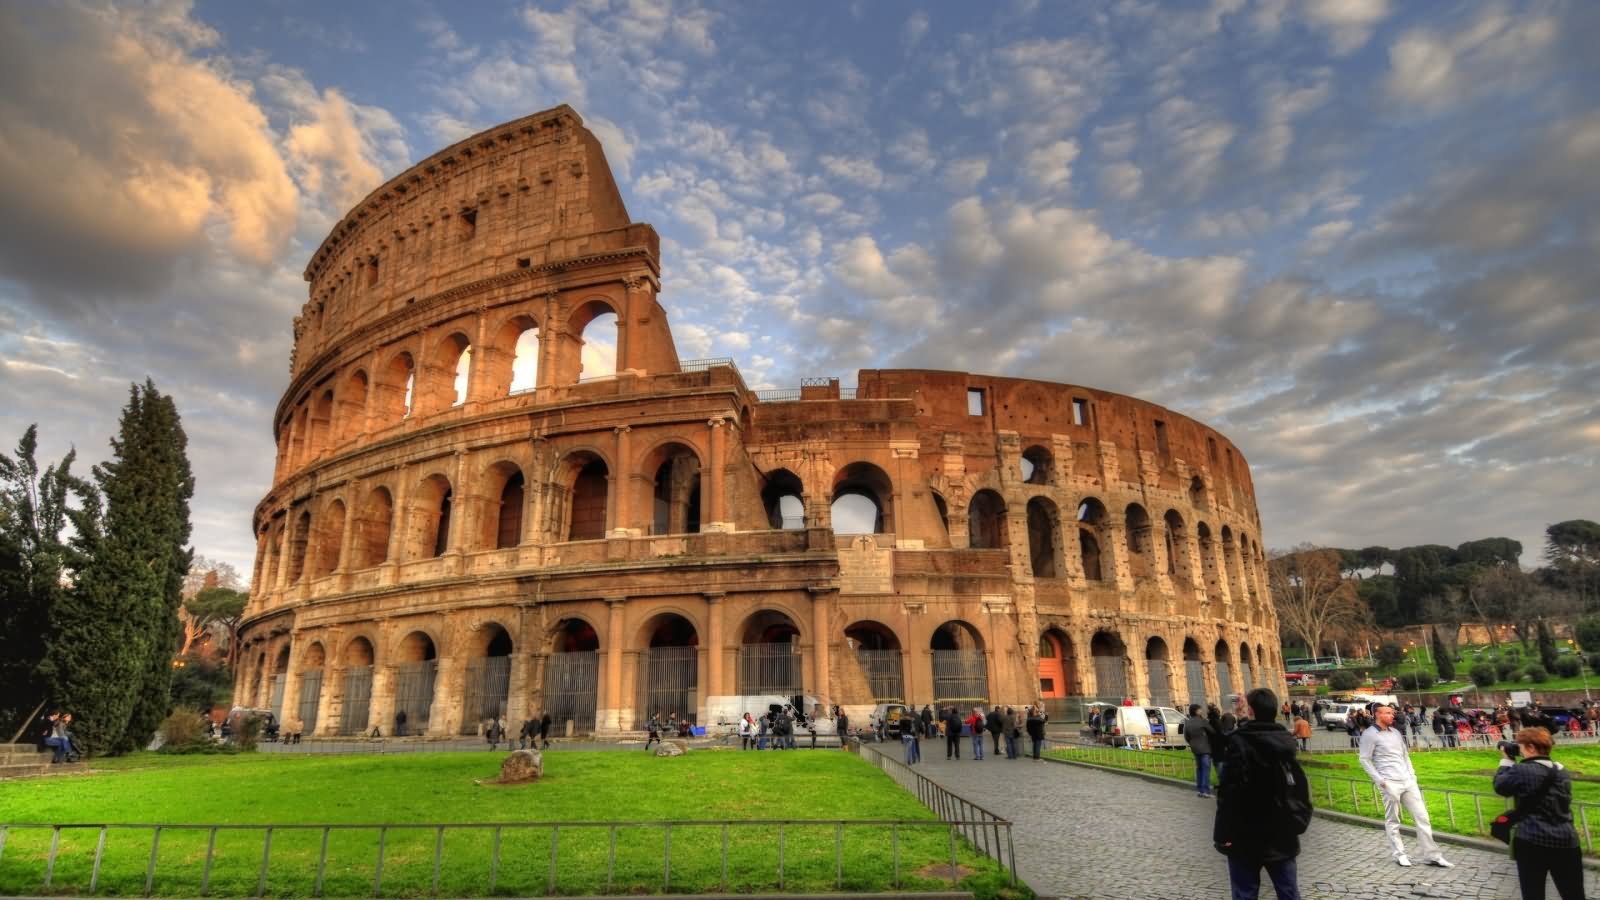 30 Very Beautiful Colosseum, Rome Pictures And Photos